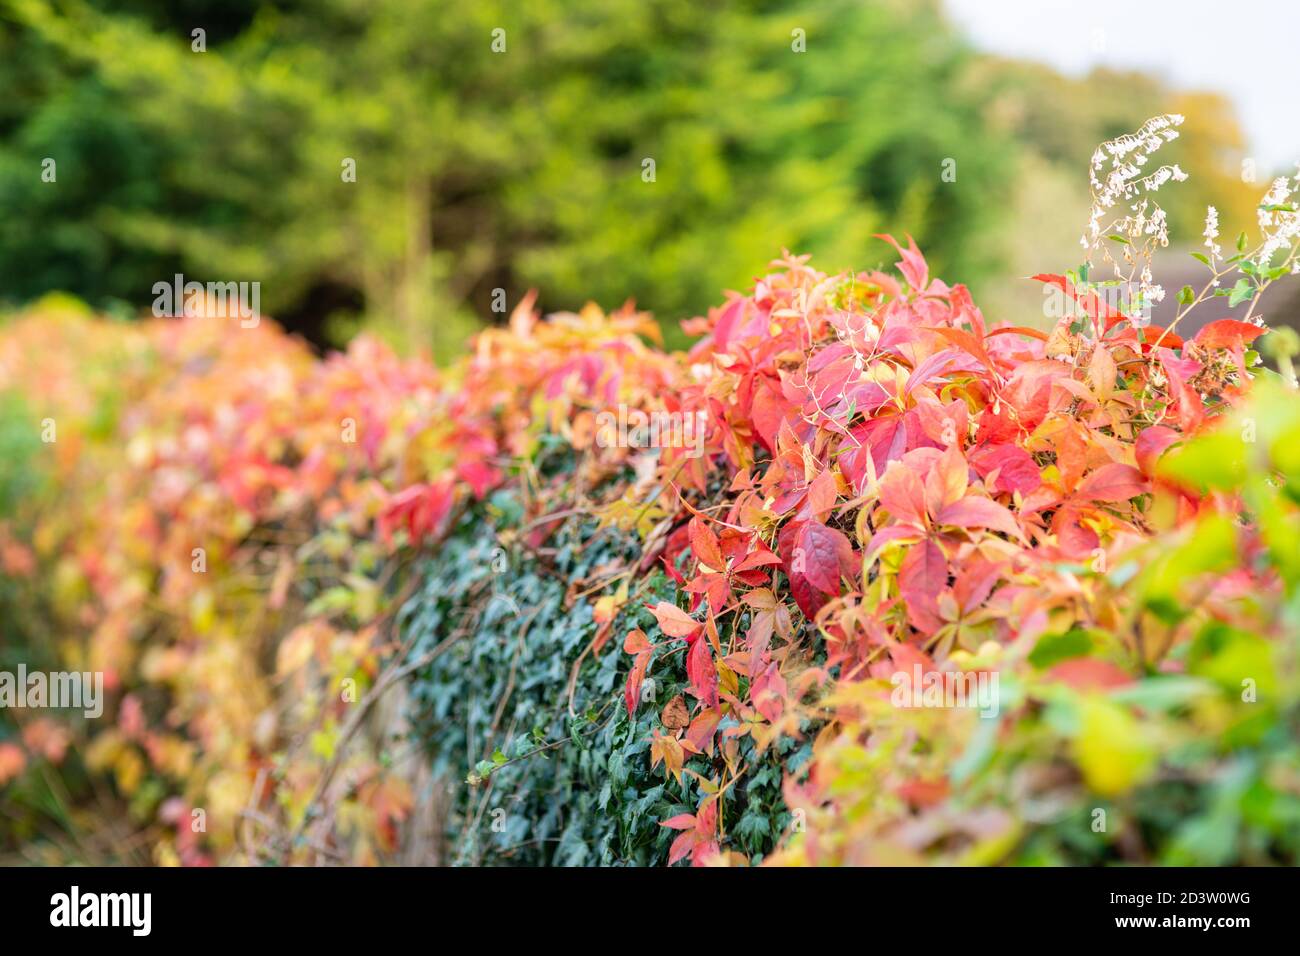 The colours of autumn or fall, orange red and yellow leaf or leaves, foliage growing on wall, autumnal, seasons, England UK Stock Photo